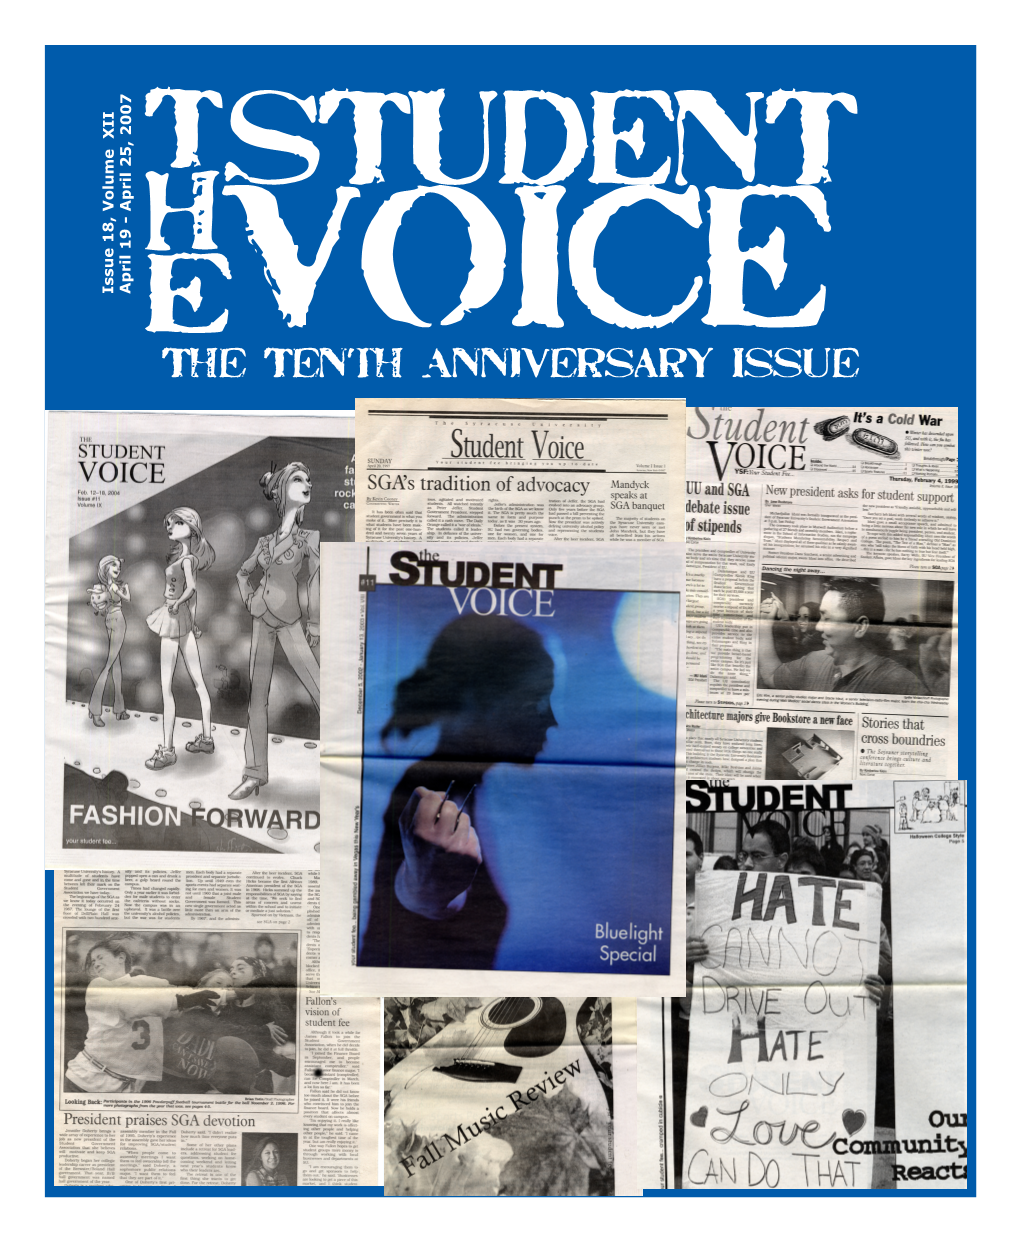 The Tenth Anniversary Issue COVER PHOTO Provided by INSIDE the Student Voice Archives 2 Issue 18 Paid for by Your Student Fee